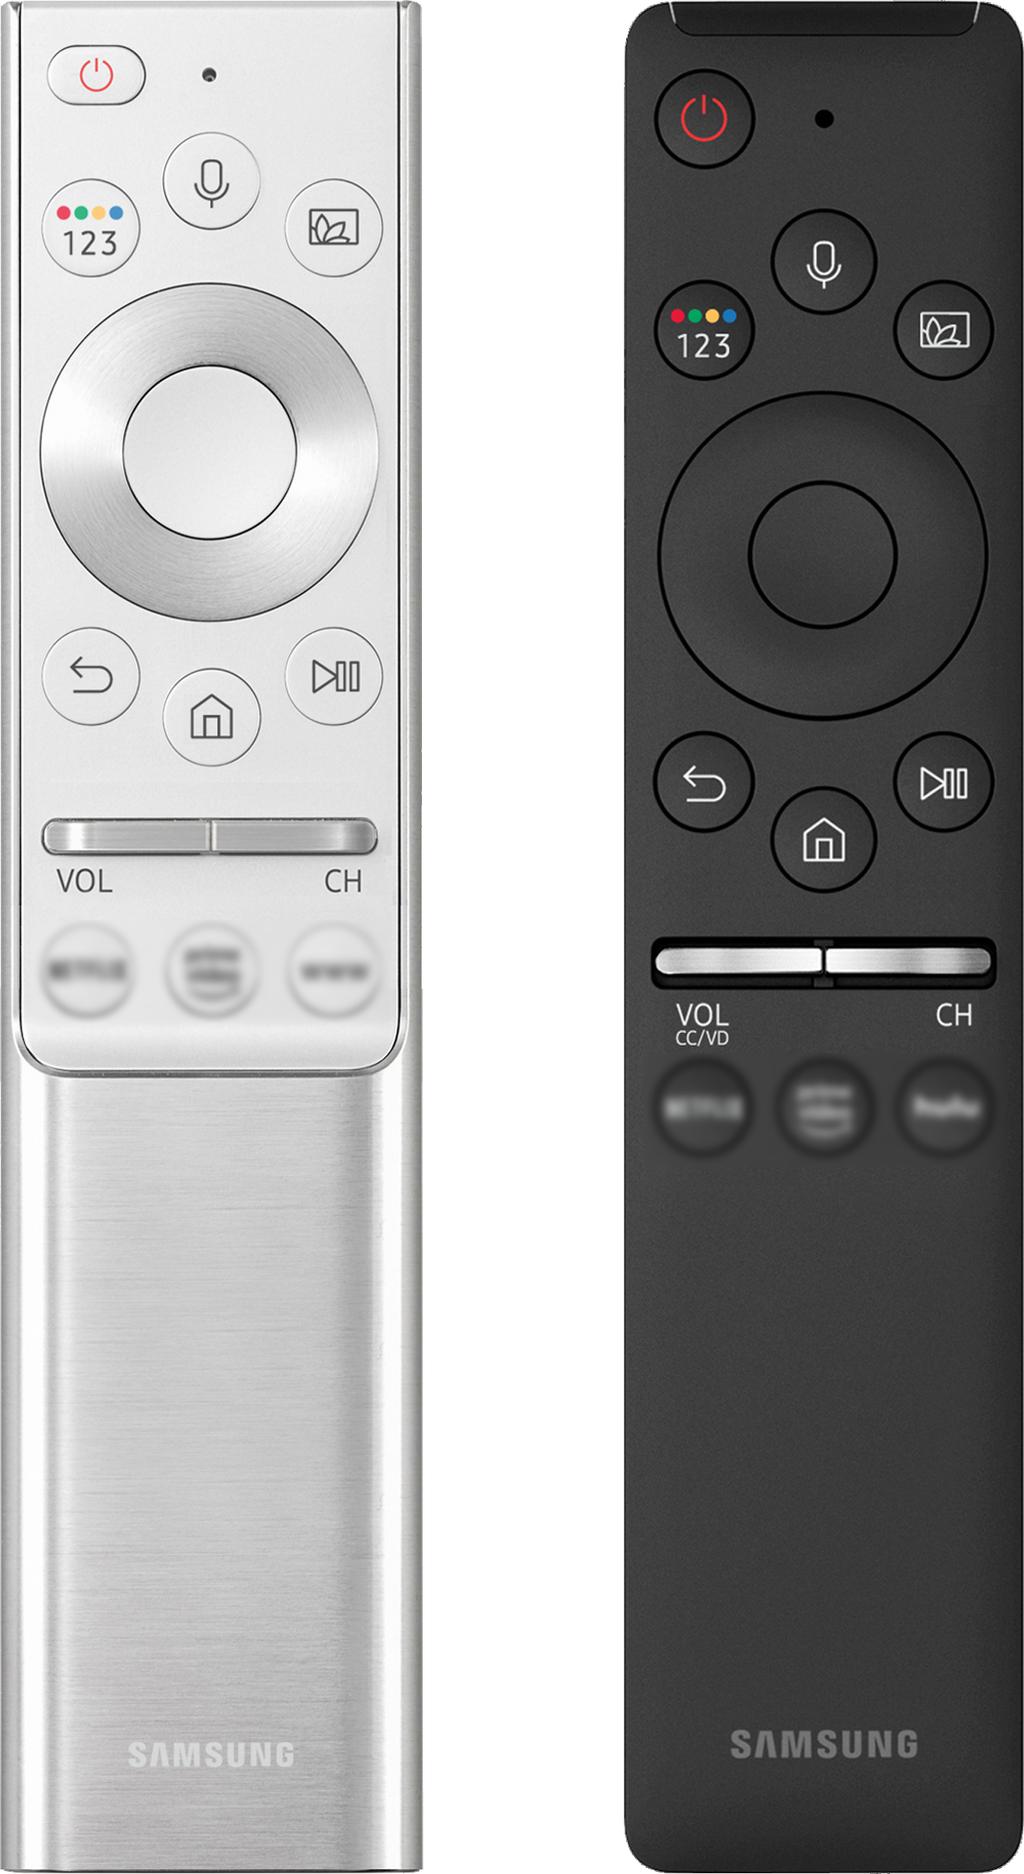 Remote Control and Peripherals You can control TV operations with